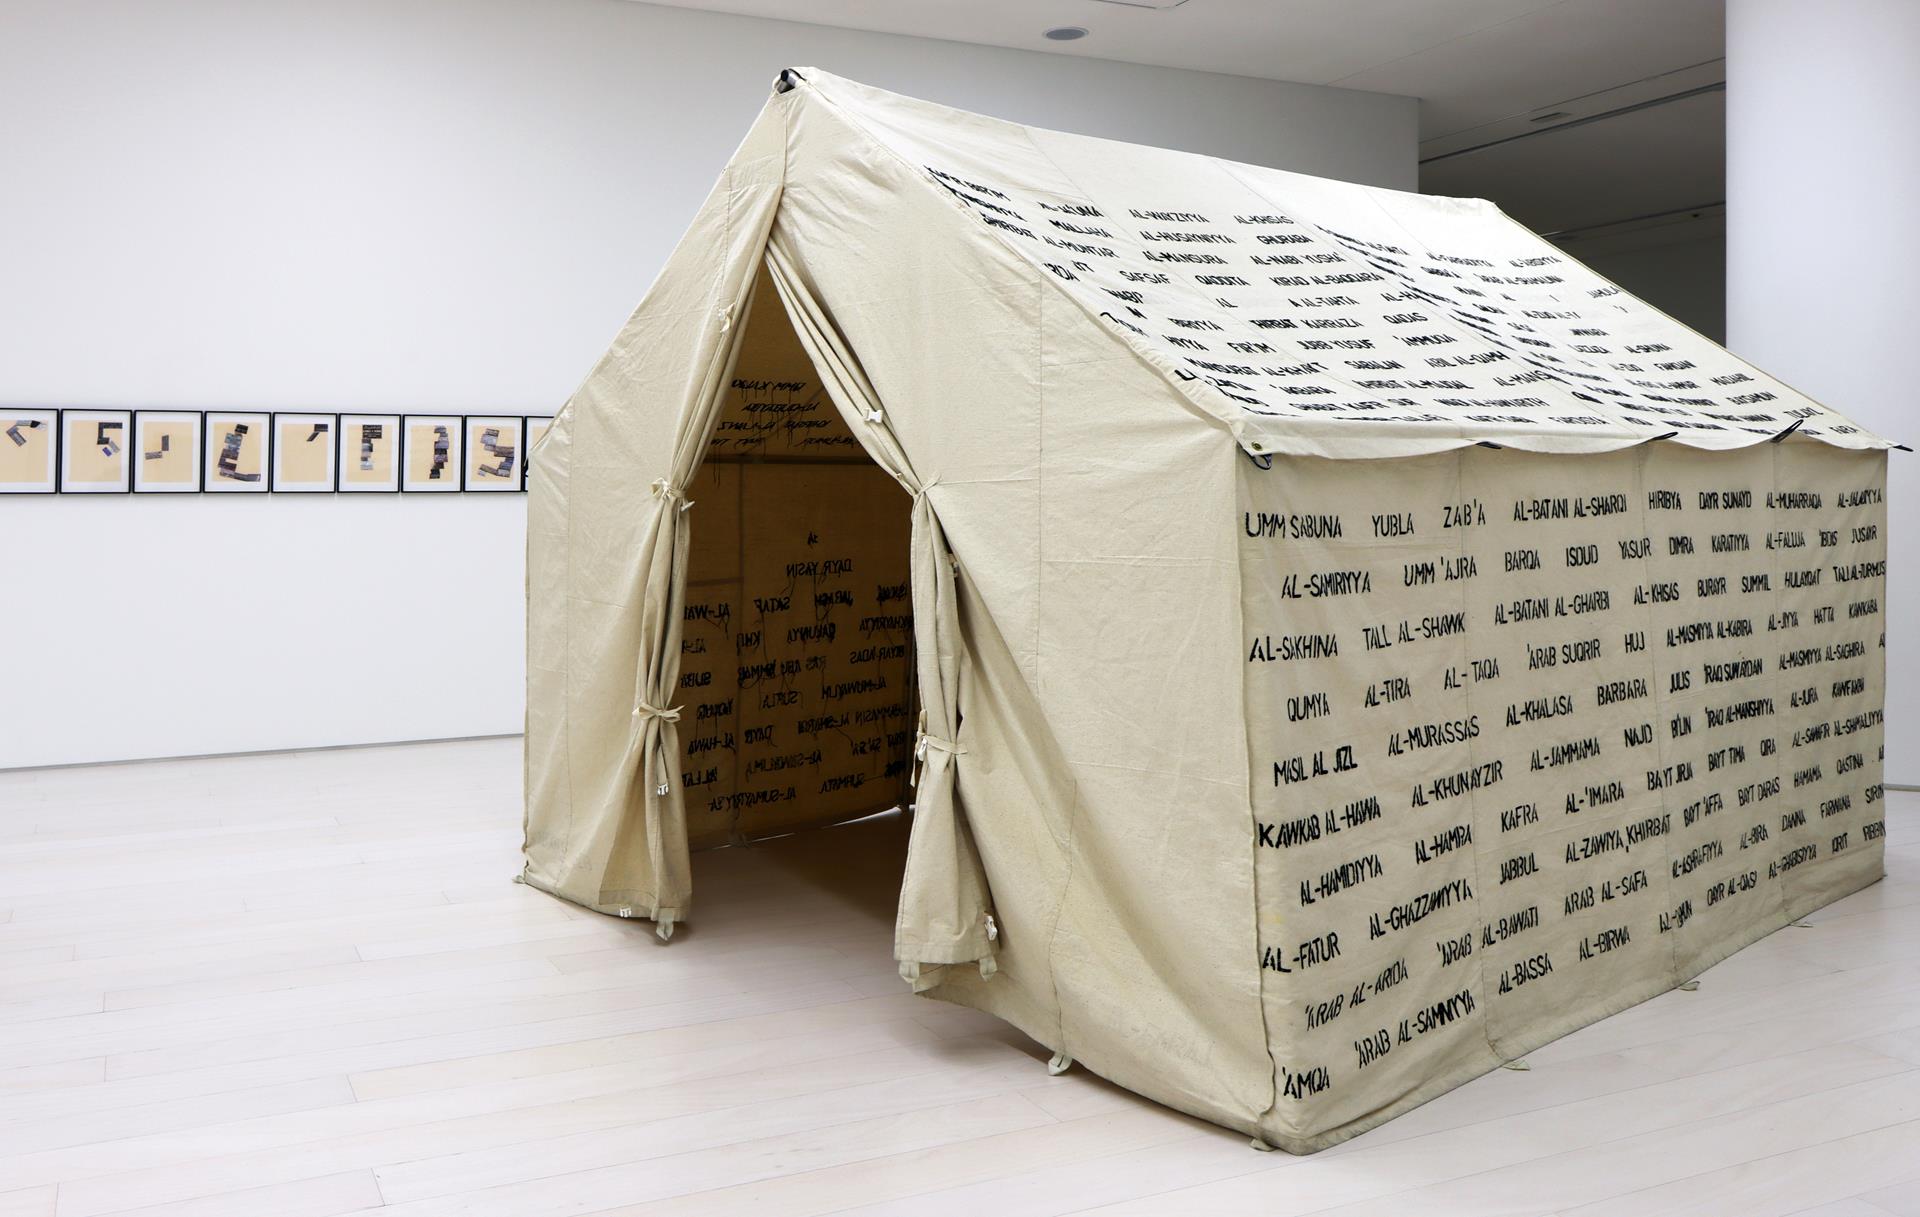 The Refugee Tent created by Emily Jacir